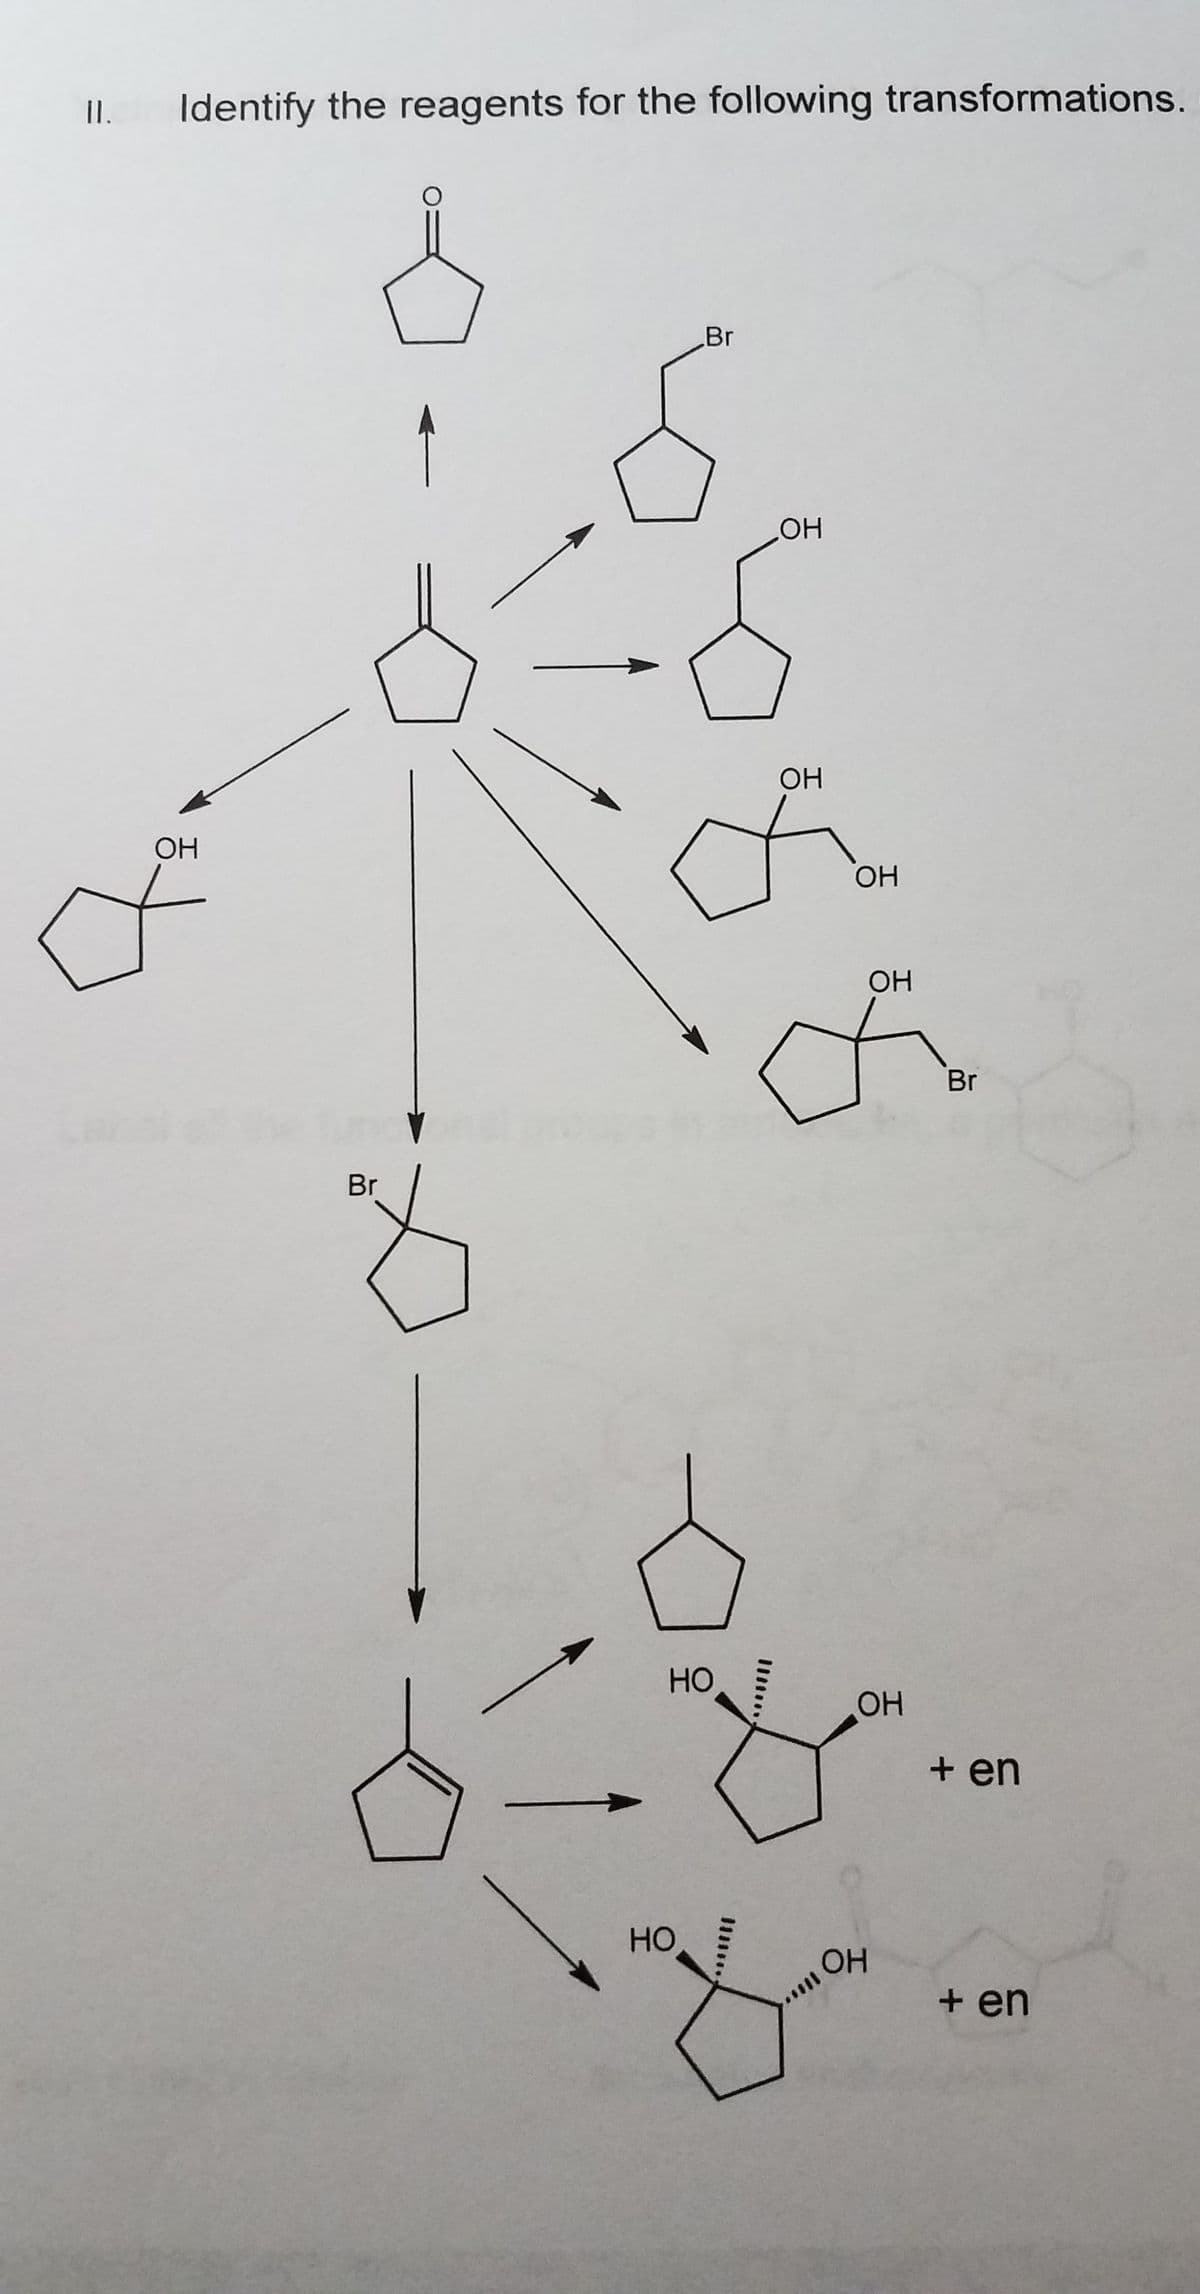 II.
Identify the reagents for the following transformations.
Br
ОН
ОН
OH
OH
Br
Br
HO
OH
+ en
HO
OH
+ en
